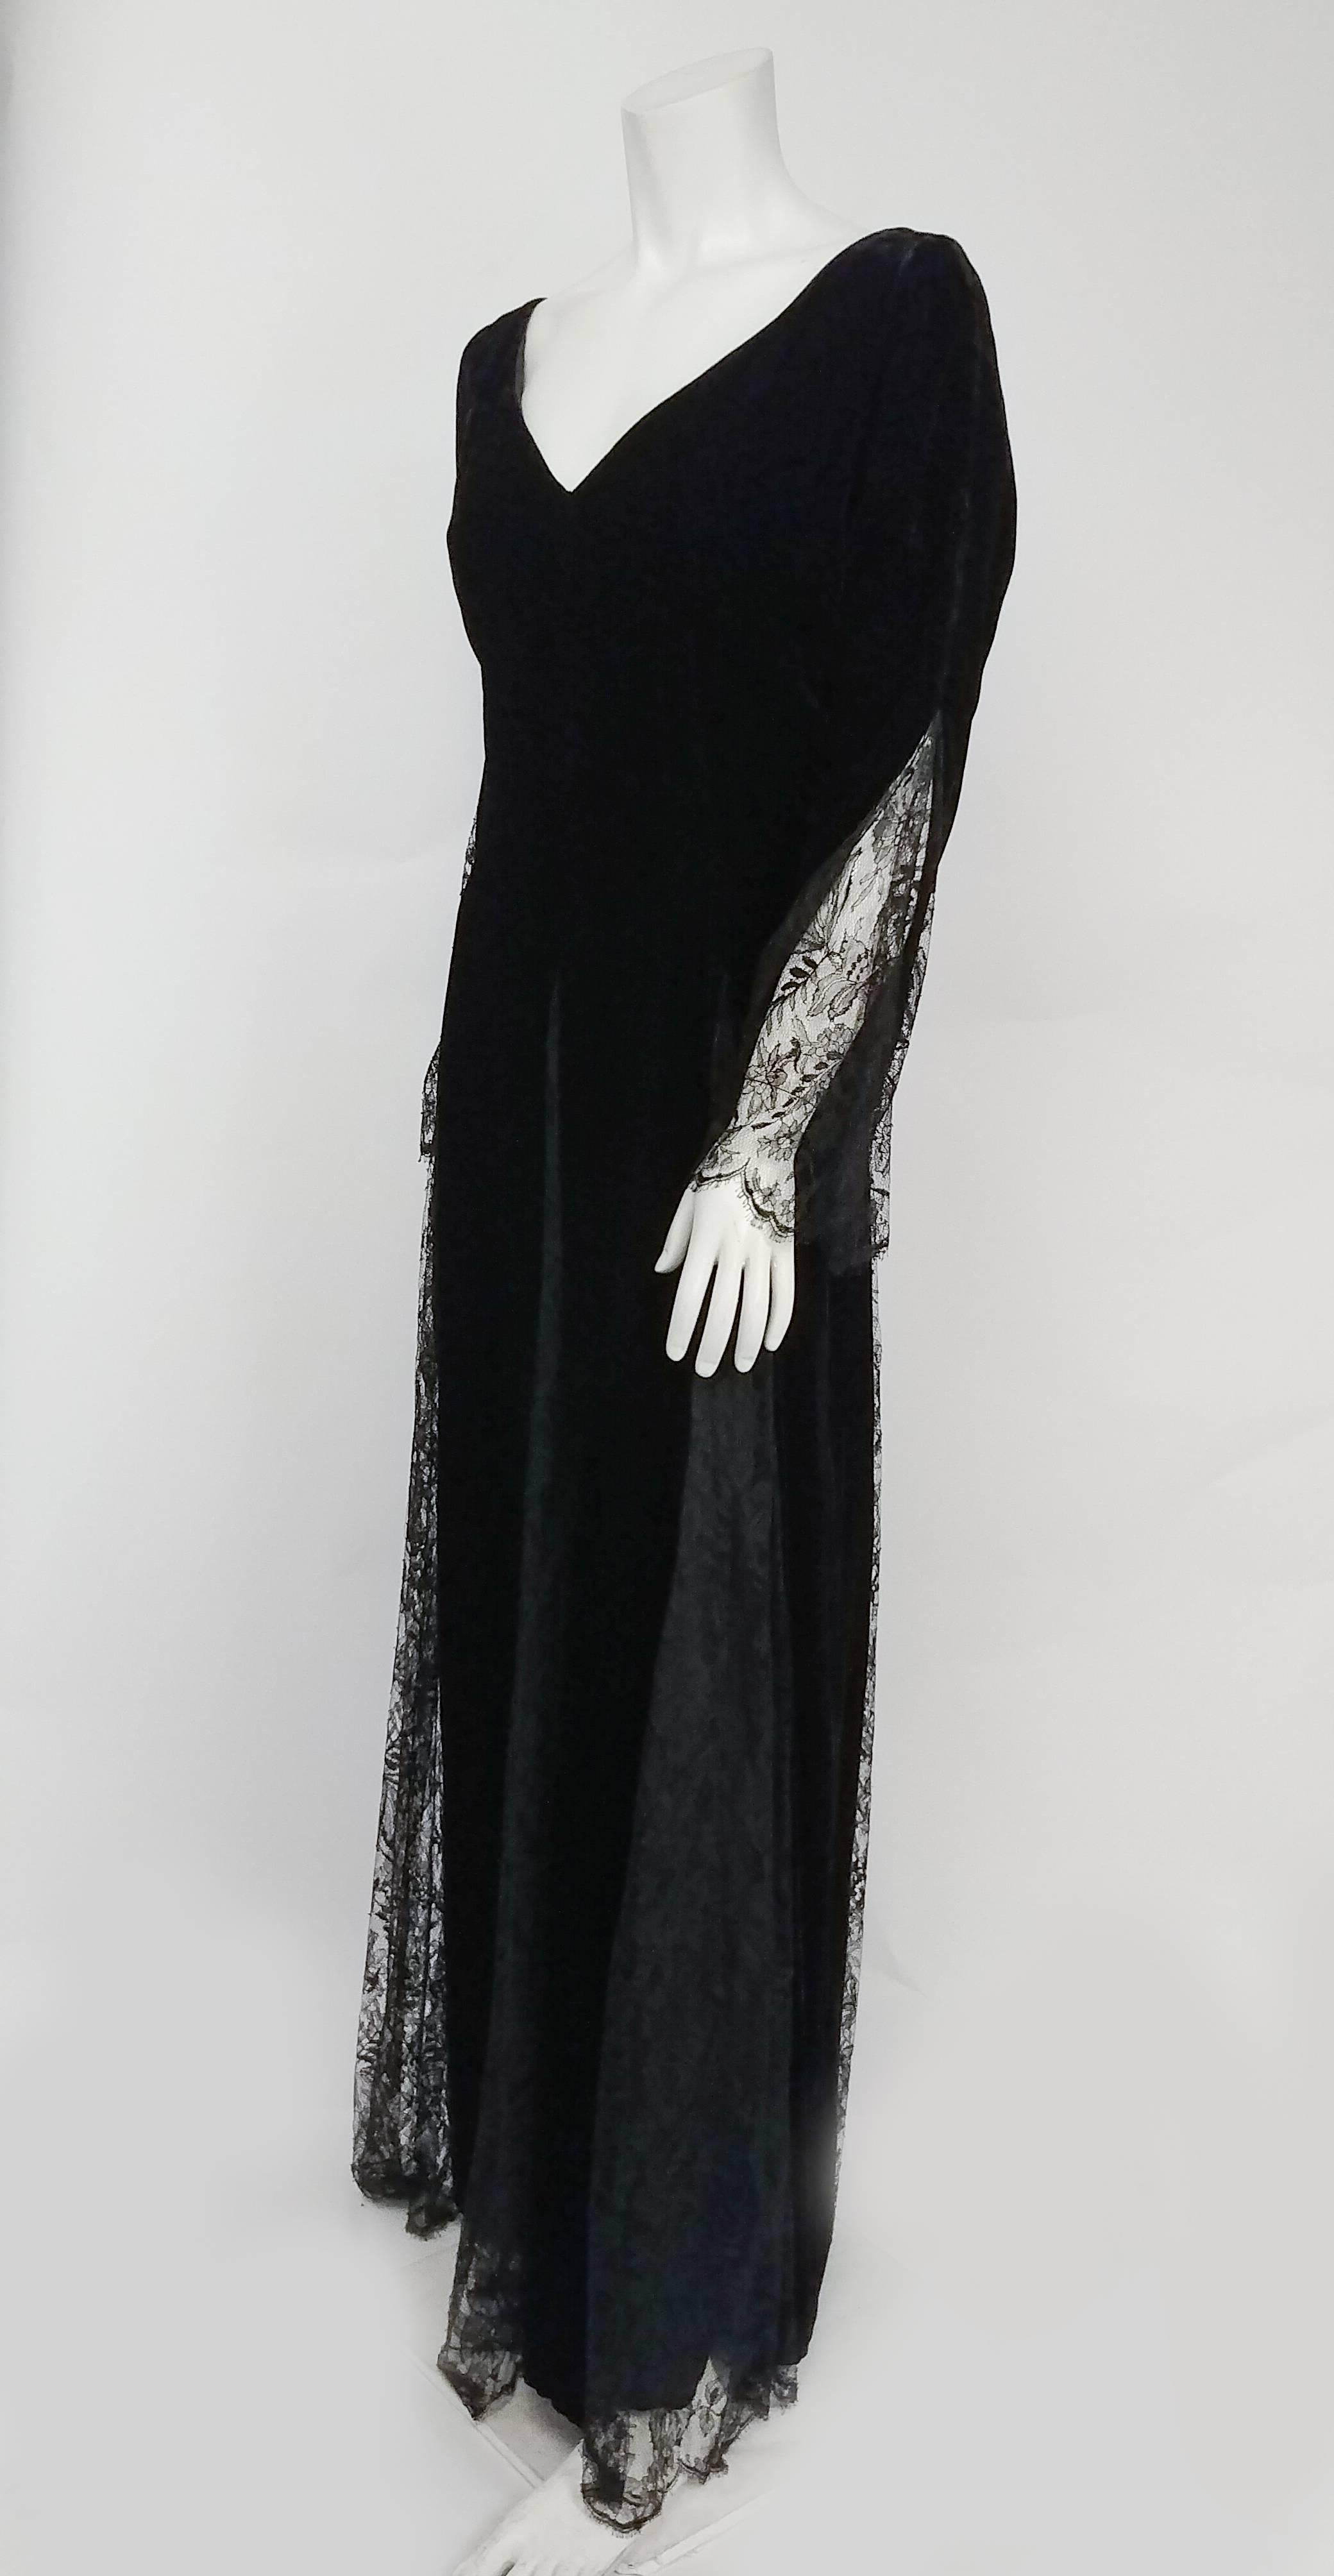 1980s Bill Blass Black Velvet Gown w/ Lace Detail. Channel your inner Morticia Addams with this floor-sweeping elegant velvet gown with dramatic lace sleeves. Flattering wide V neck. Zips up back. 

The measurements for this gown are as